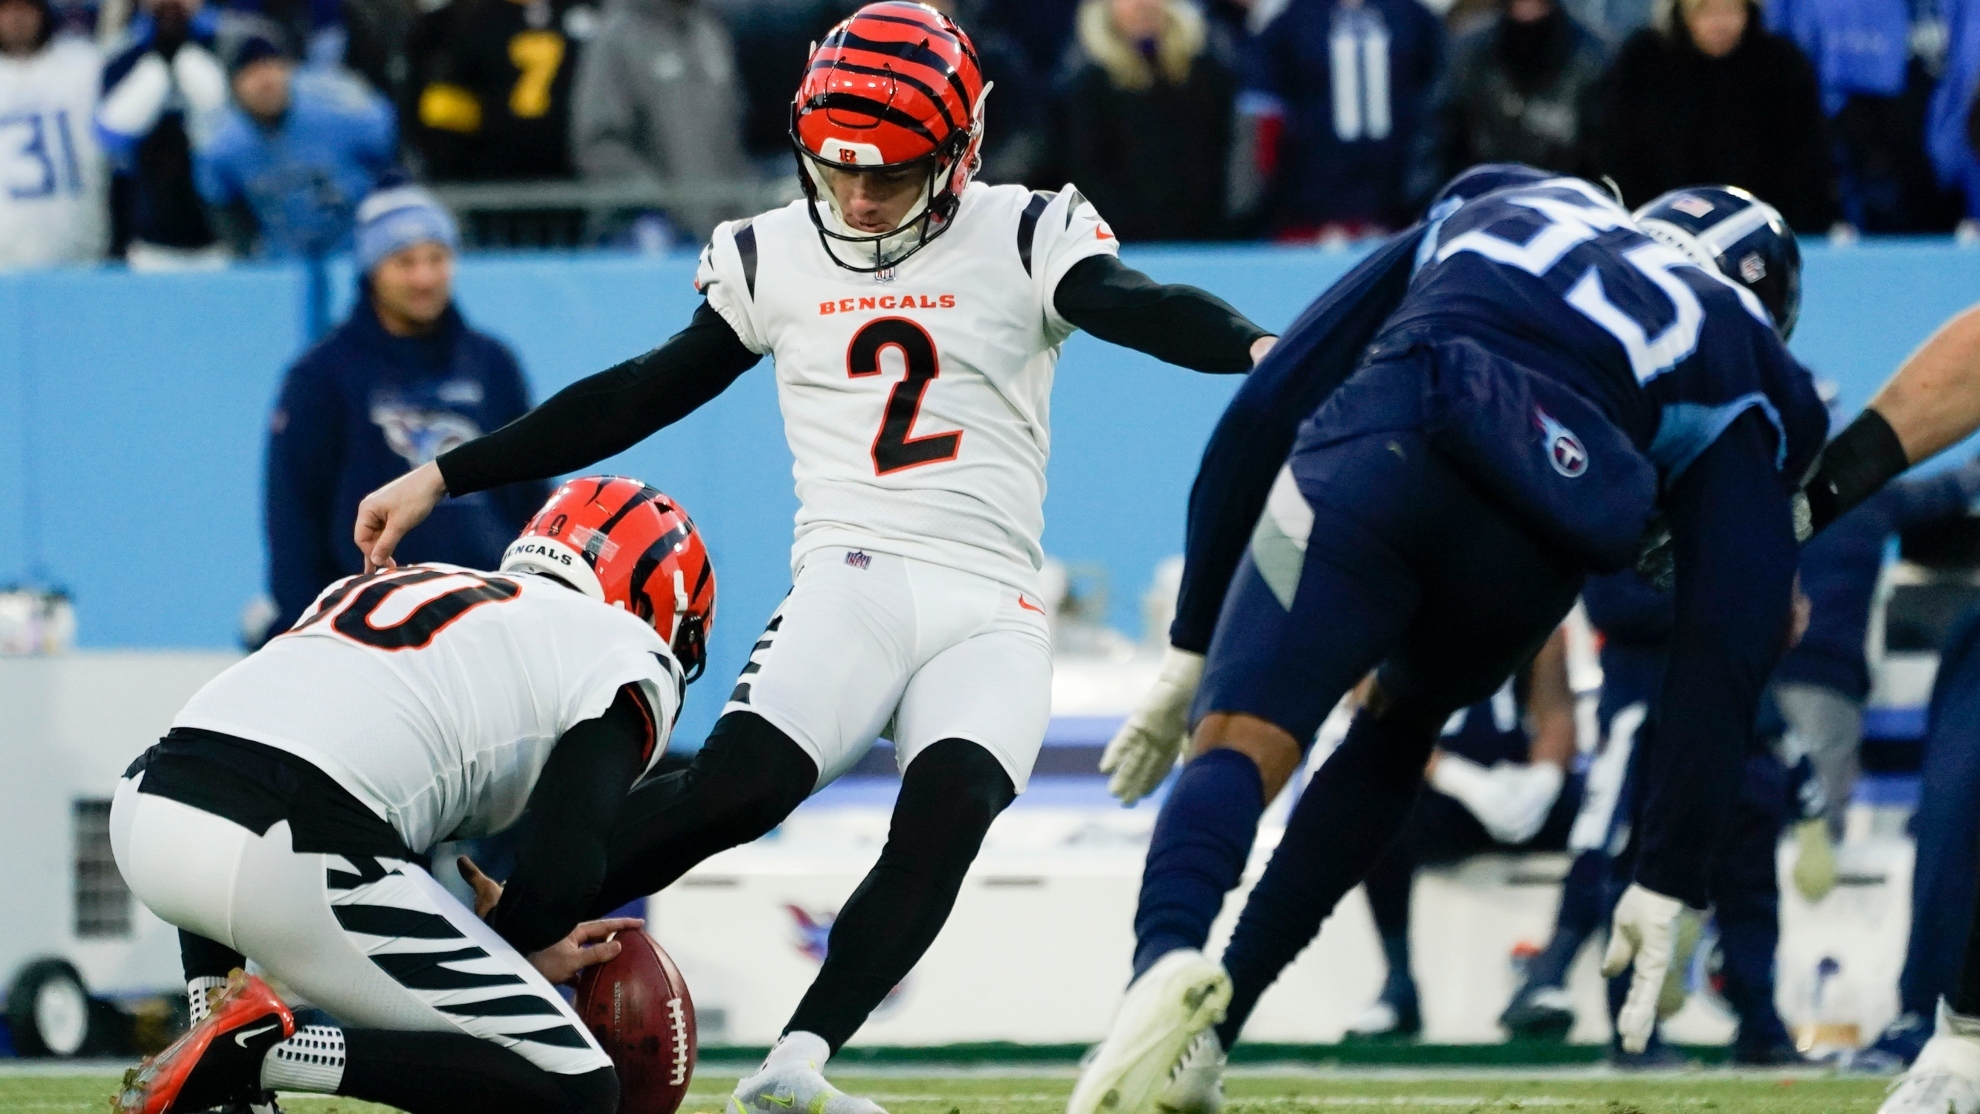 Cincinnati Bengals kicker Evan McPherson (2) kicks a 54-yard field goal against the Tennessee Titans during the first half of an NFL divisional round playoff football game, Saturday, Jan. 22, 2022